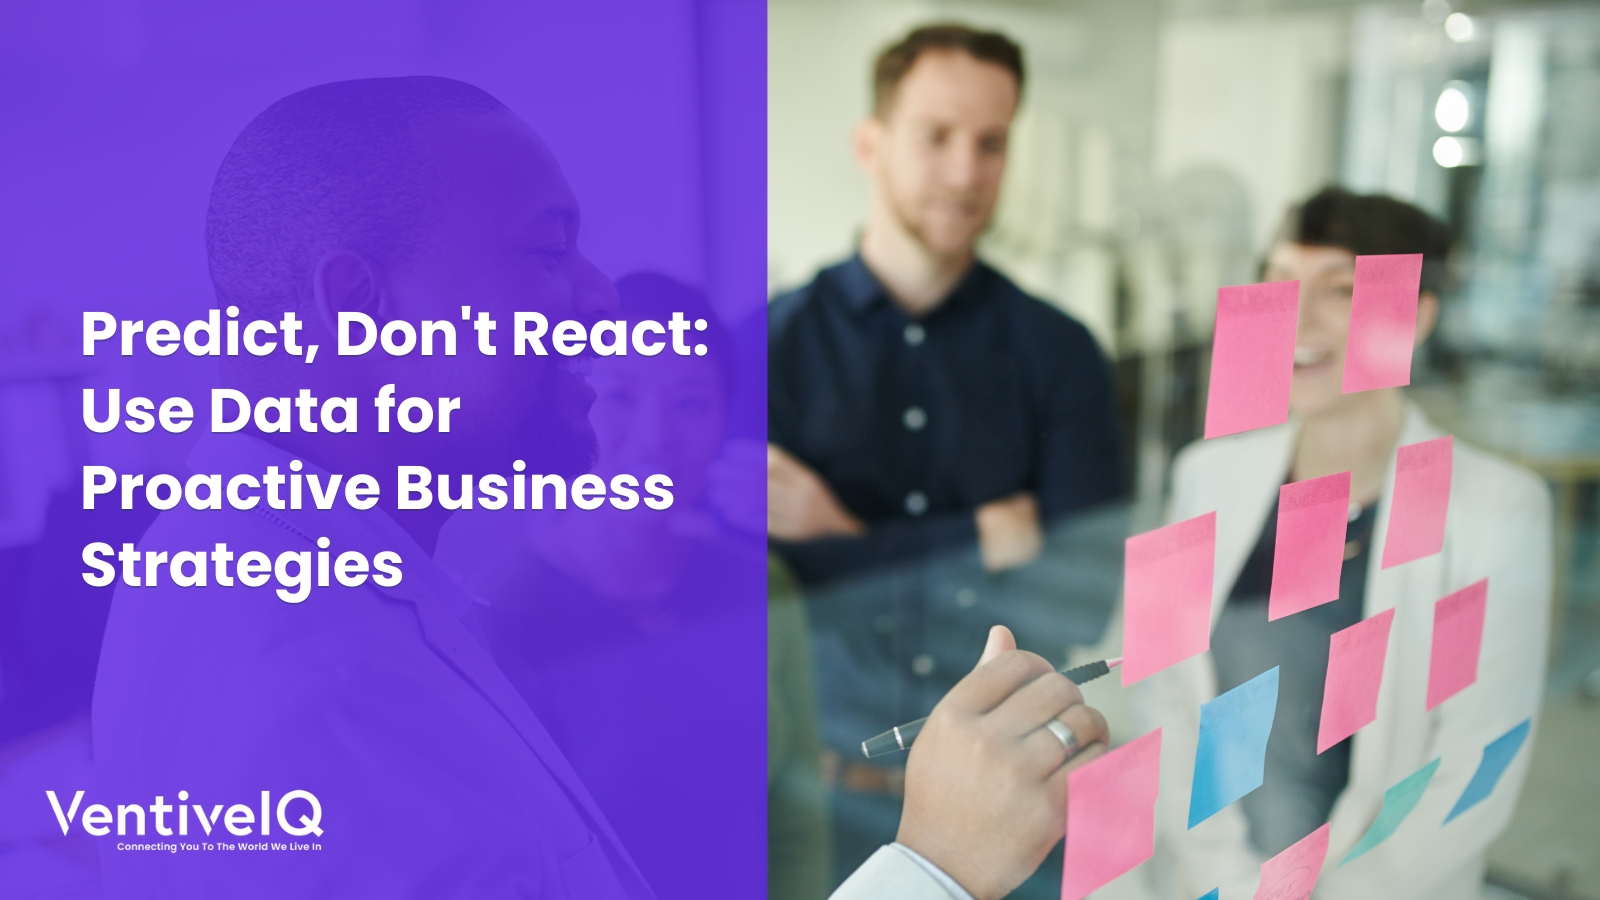 Use Data for Proactive Business Strategies: Predict, Don’t React